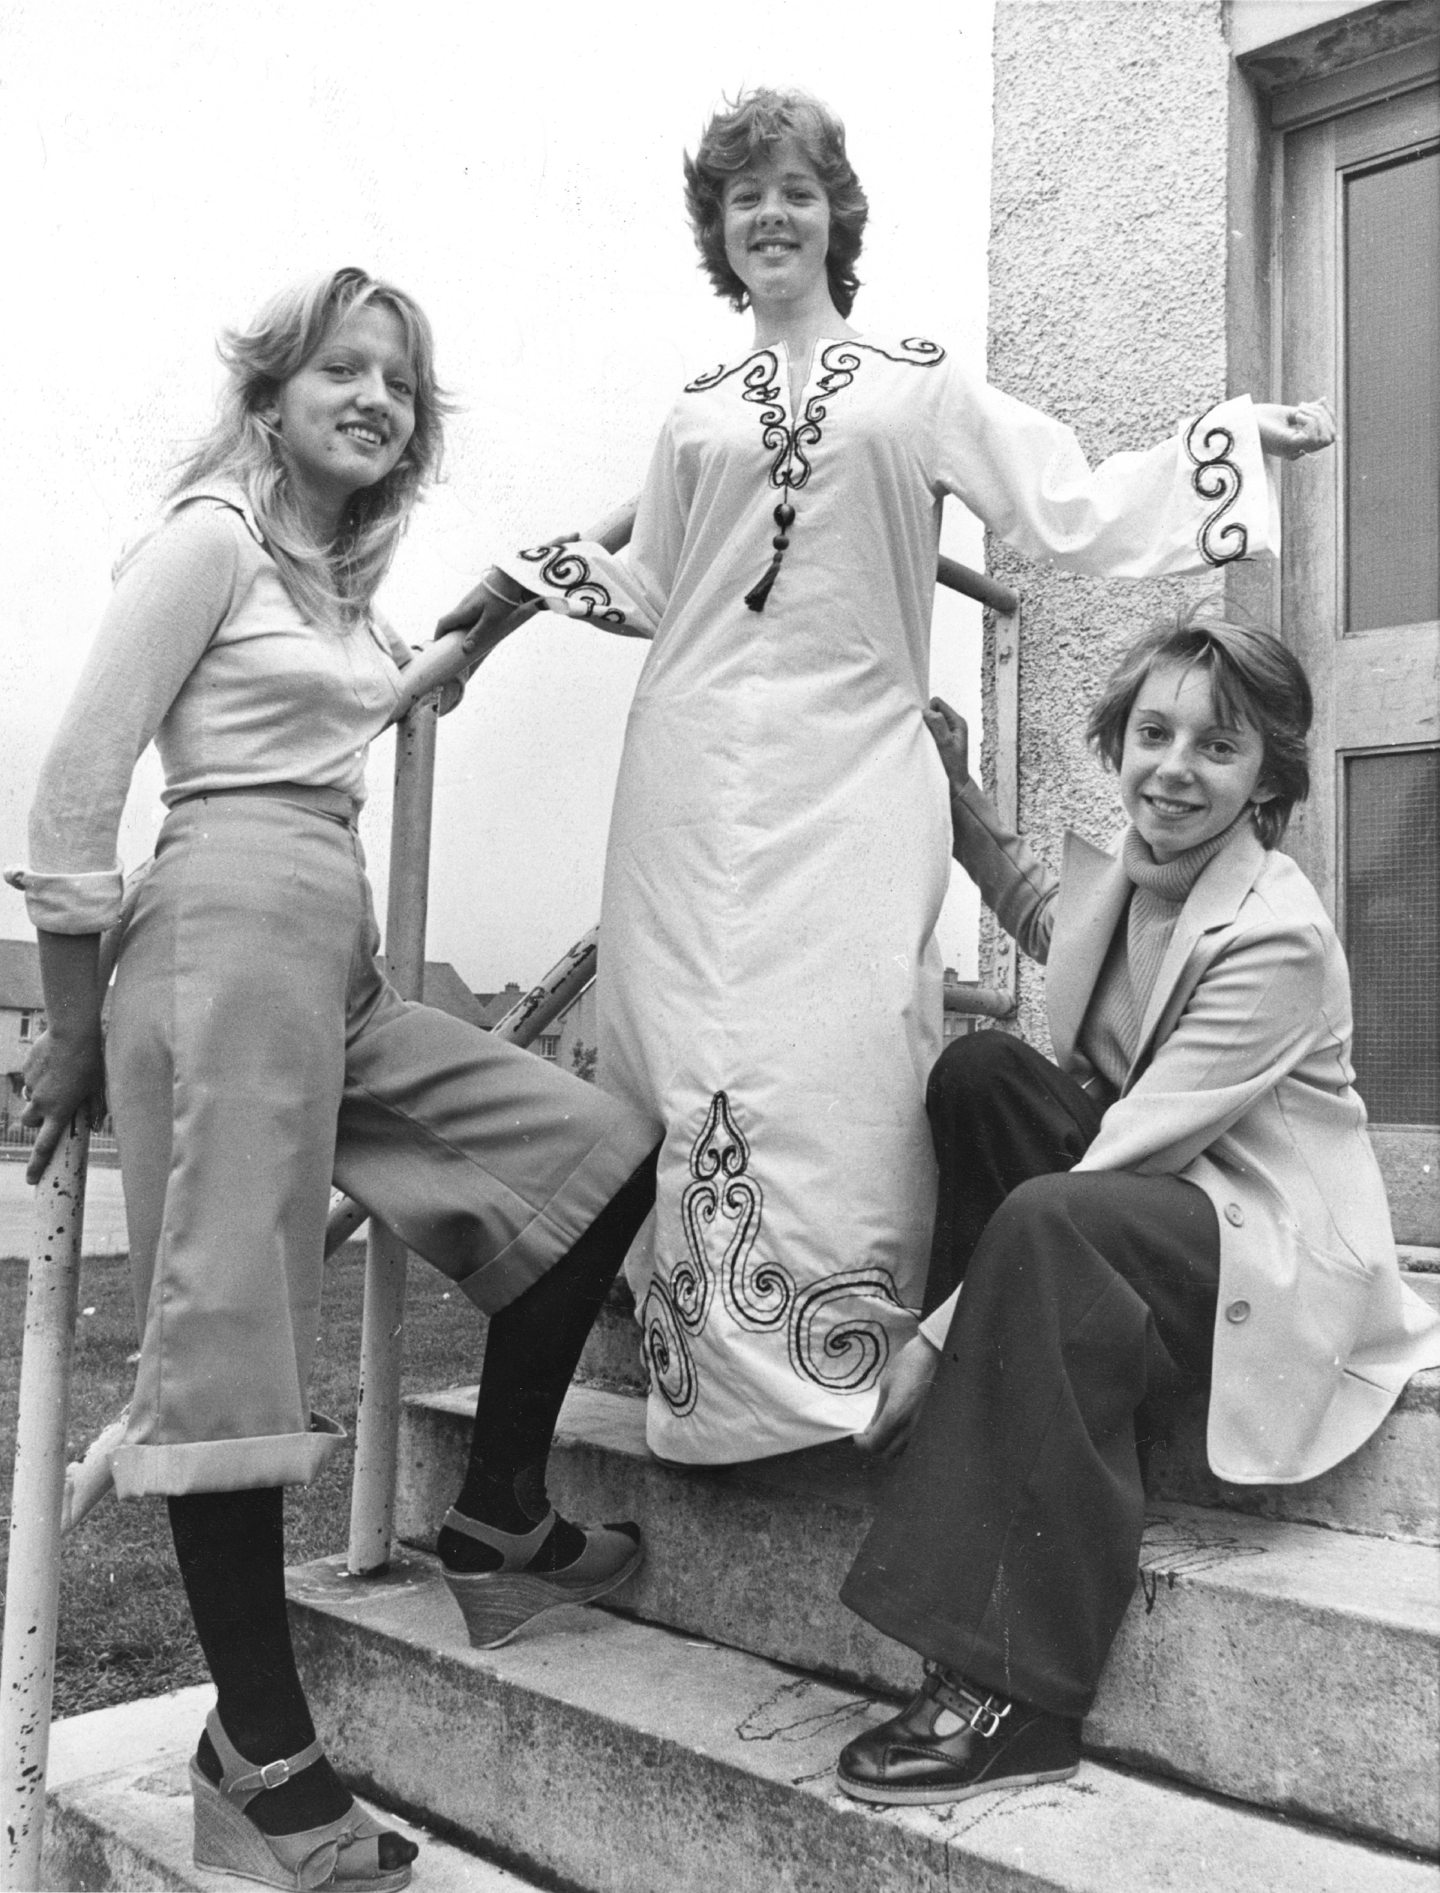 Four young budding fashion designers who qualified for the final of a national design and dressmaking competition in London in 1976.